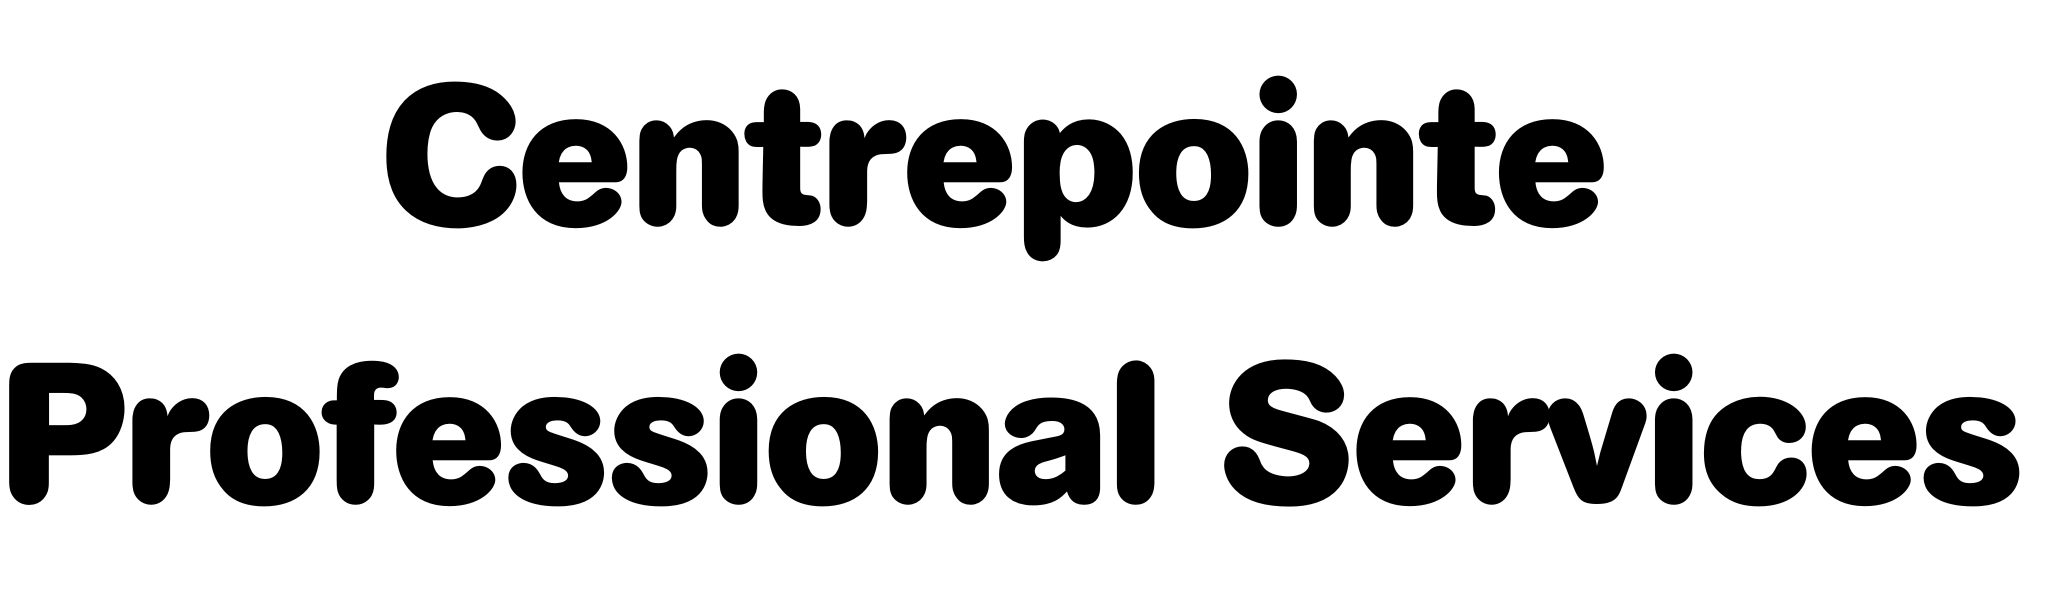 Centrepointe Professional Services (Silver)